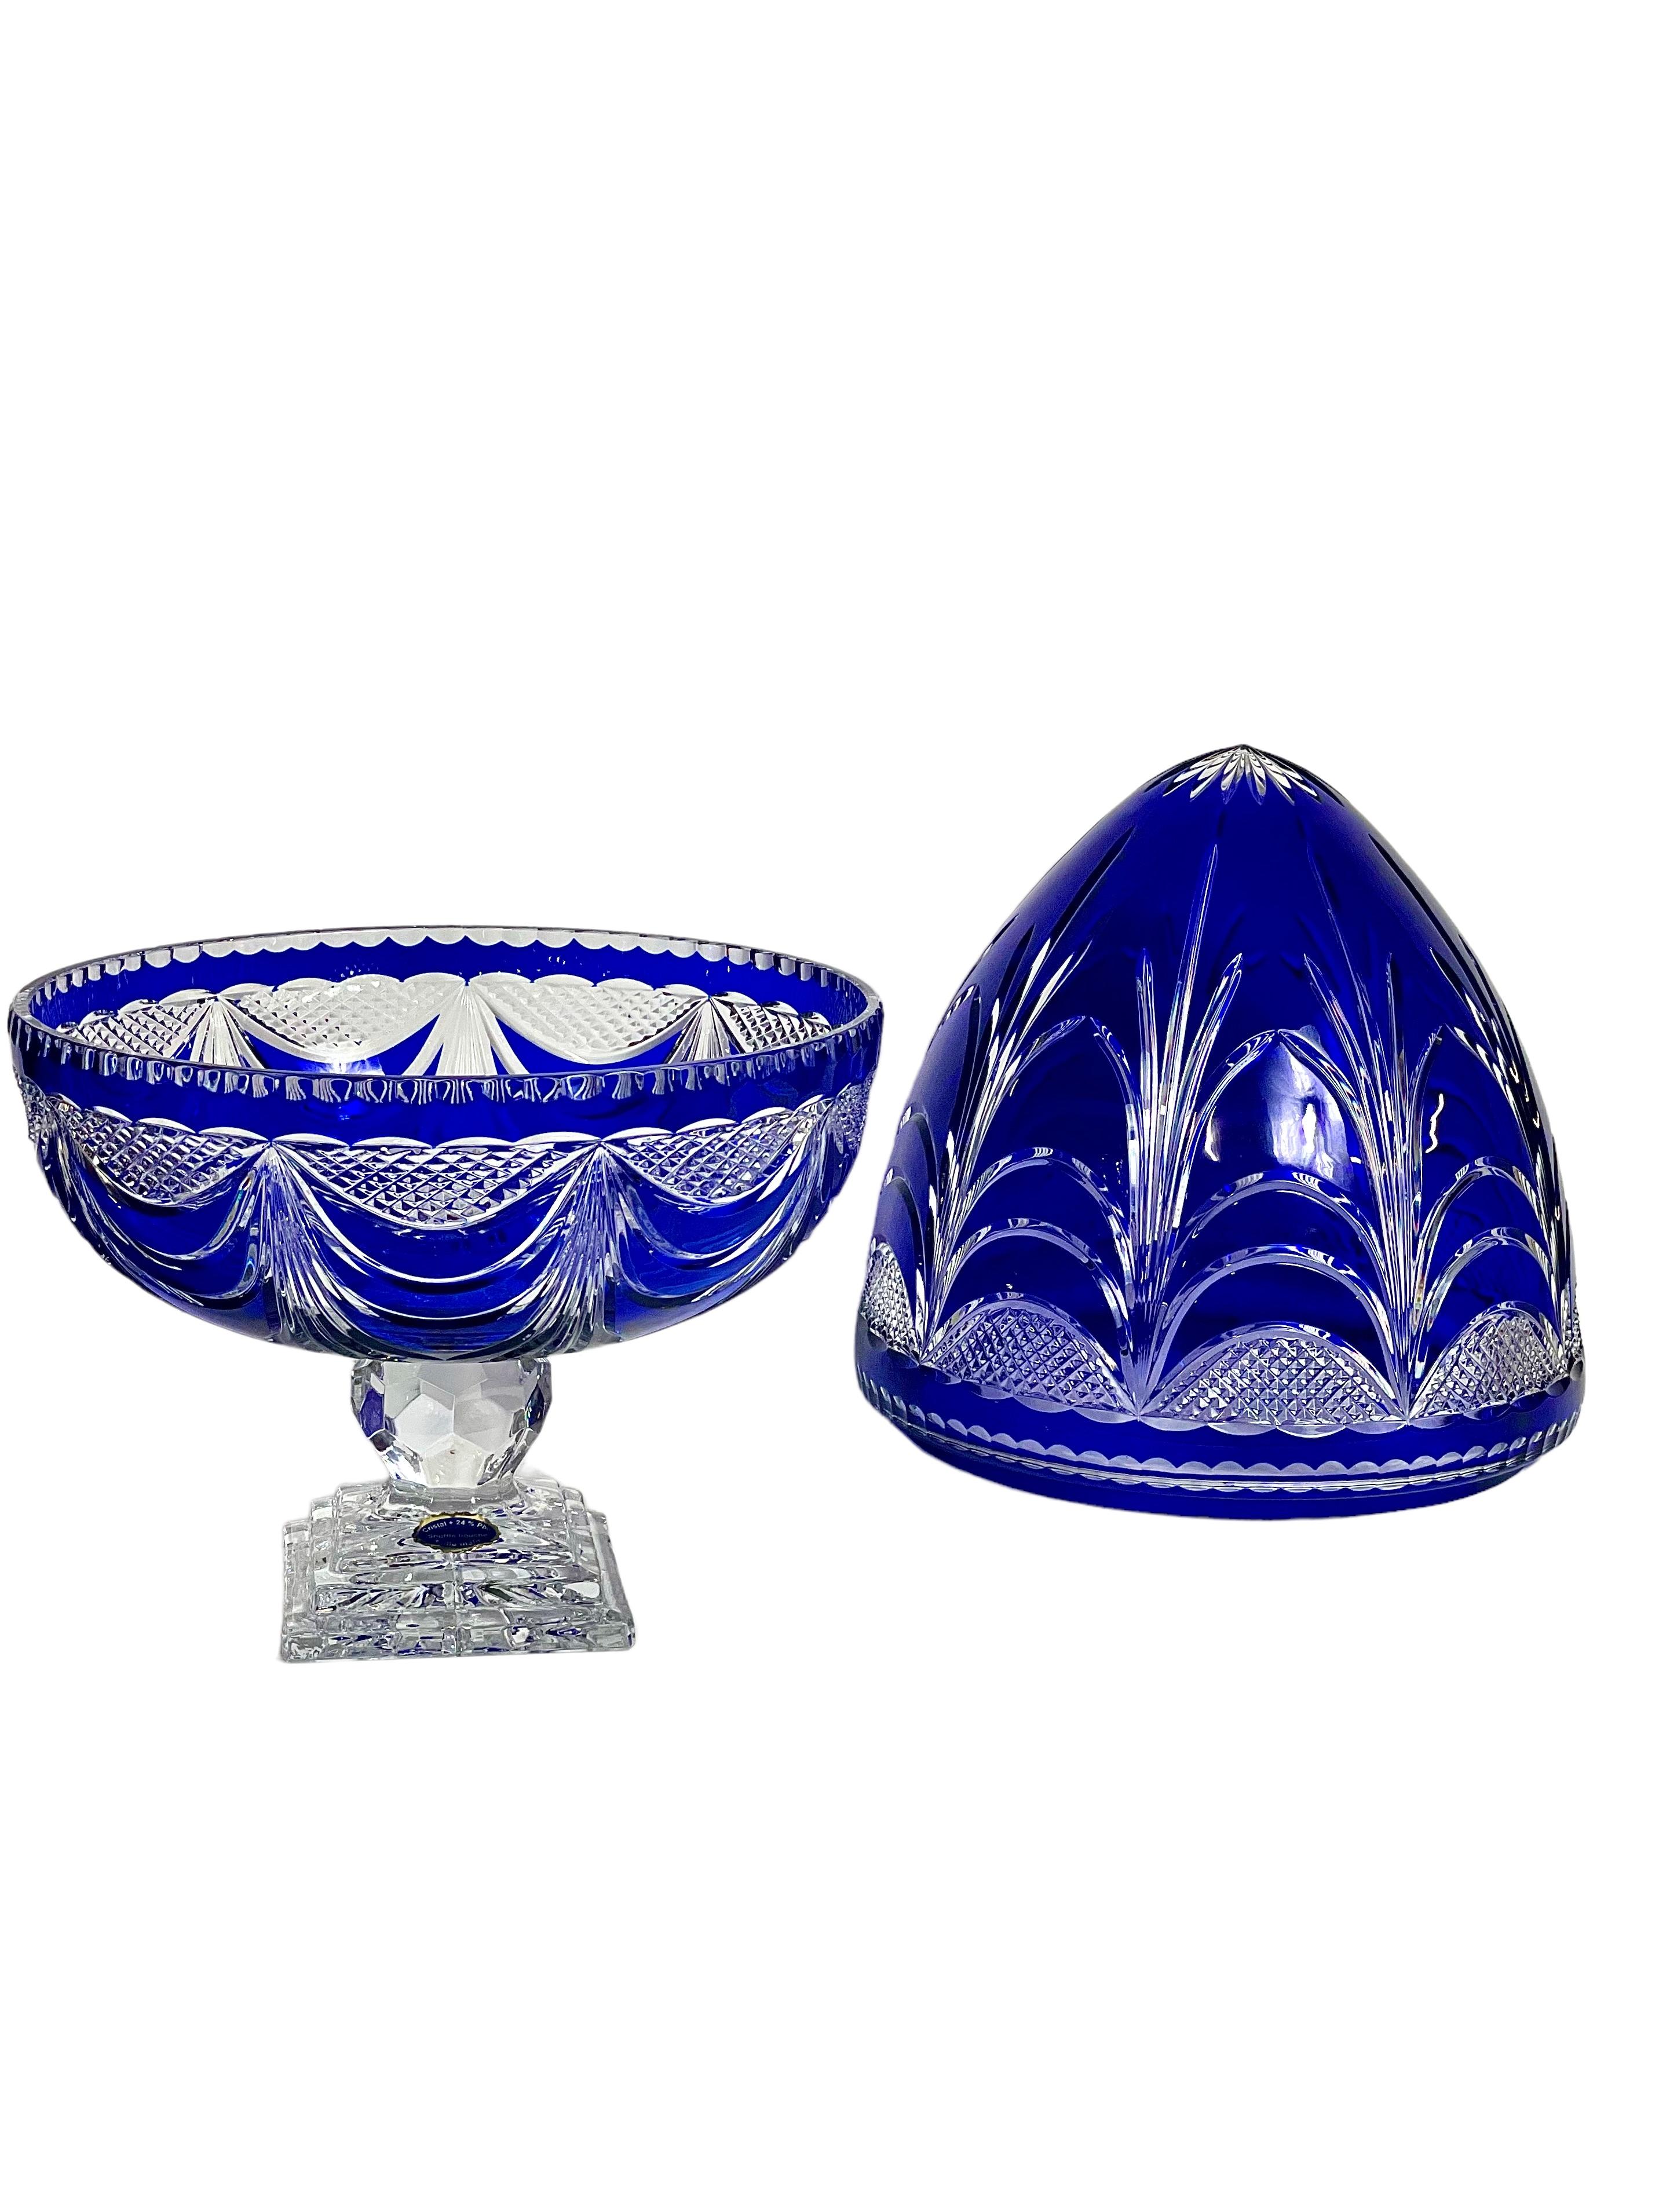 A very large and imposing cobalt-blue overlay cut-to-clear lead crystal Champagne cellar. Styled in the manner of the famous Compagnie des Cristalleries de Saint Louis, this sumptuous piece stands on a solid, square pedestal, its egg-shaped top